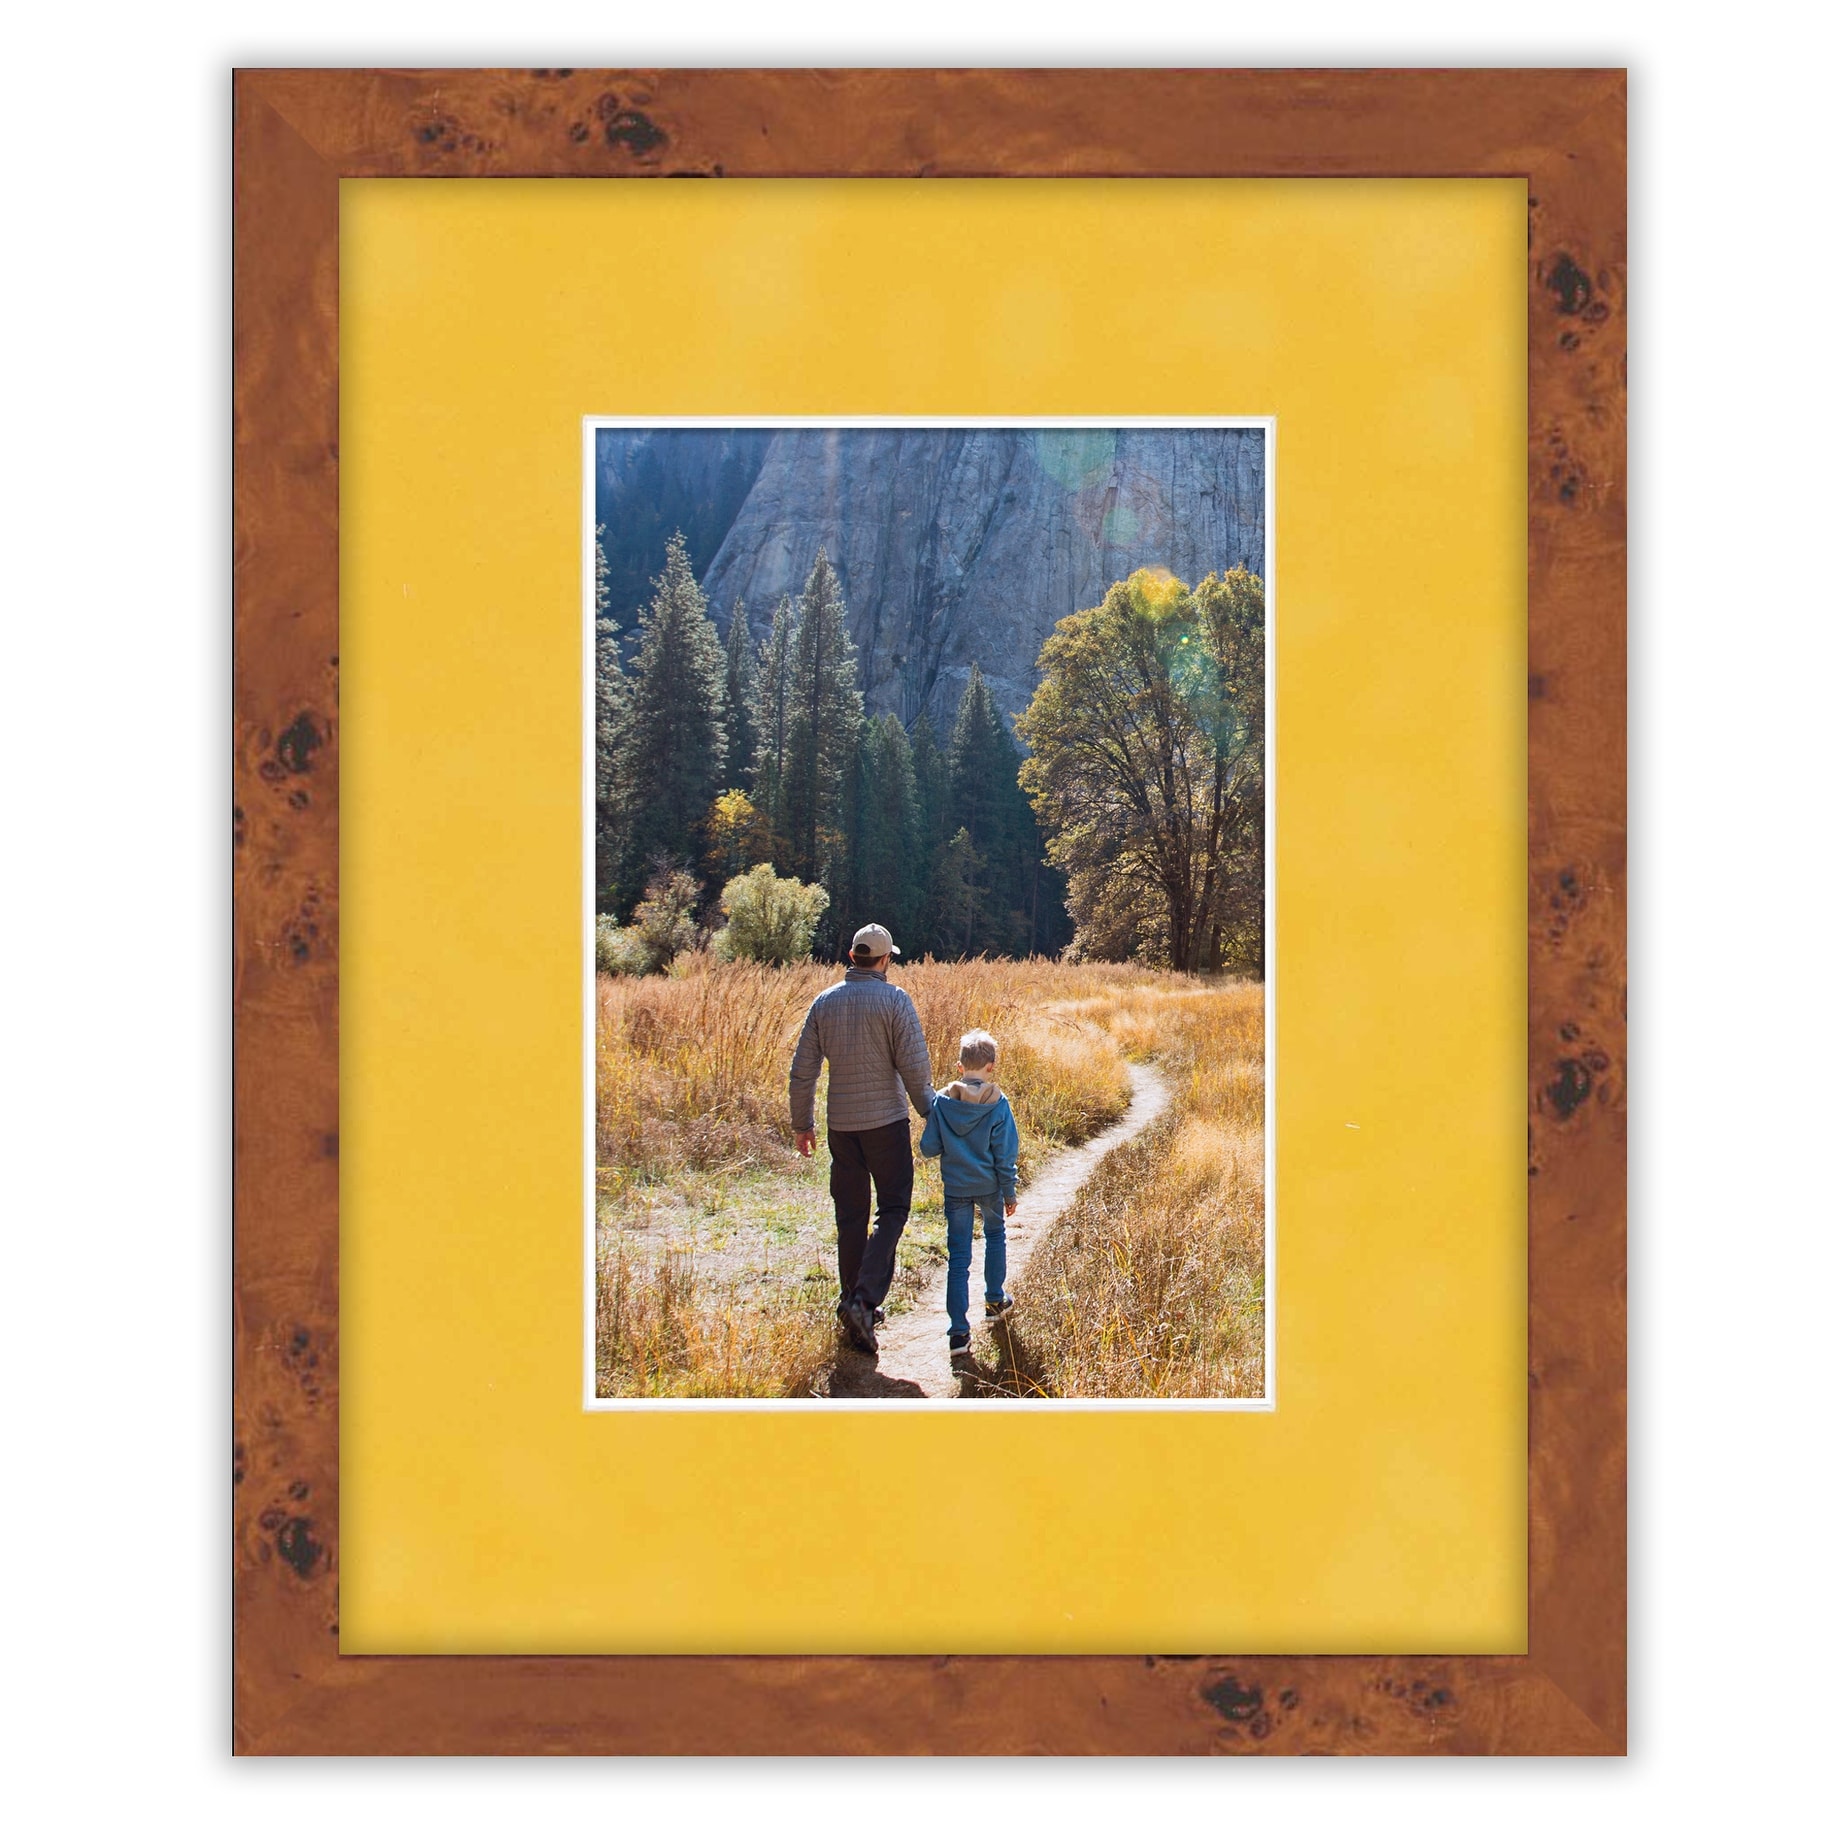  16x20 Mat for 12x16 Photo - Precut White on White Double Mat  Picture Matboard for Frames Measuring 16 x 20 Inches - Bevel Cut Matte to  Display Art Measuring 12 x